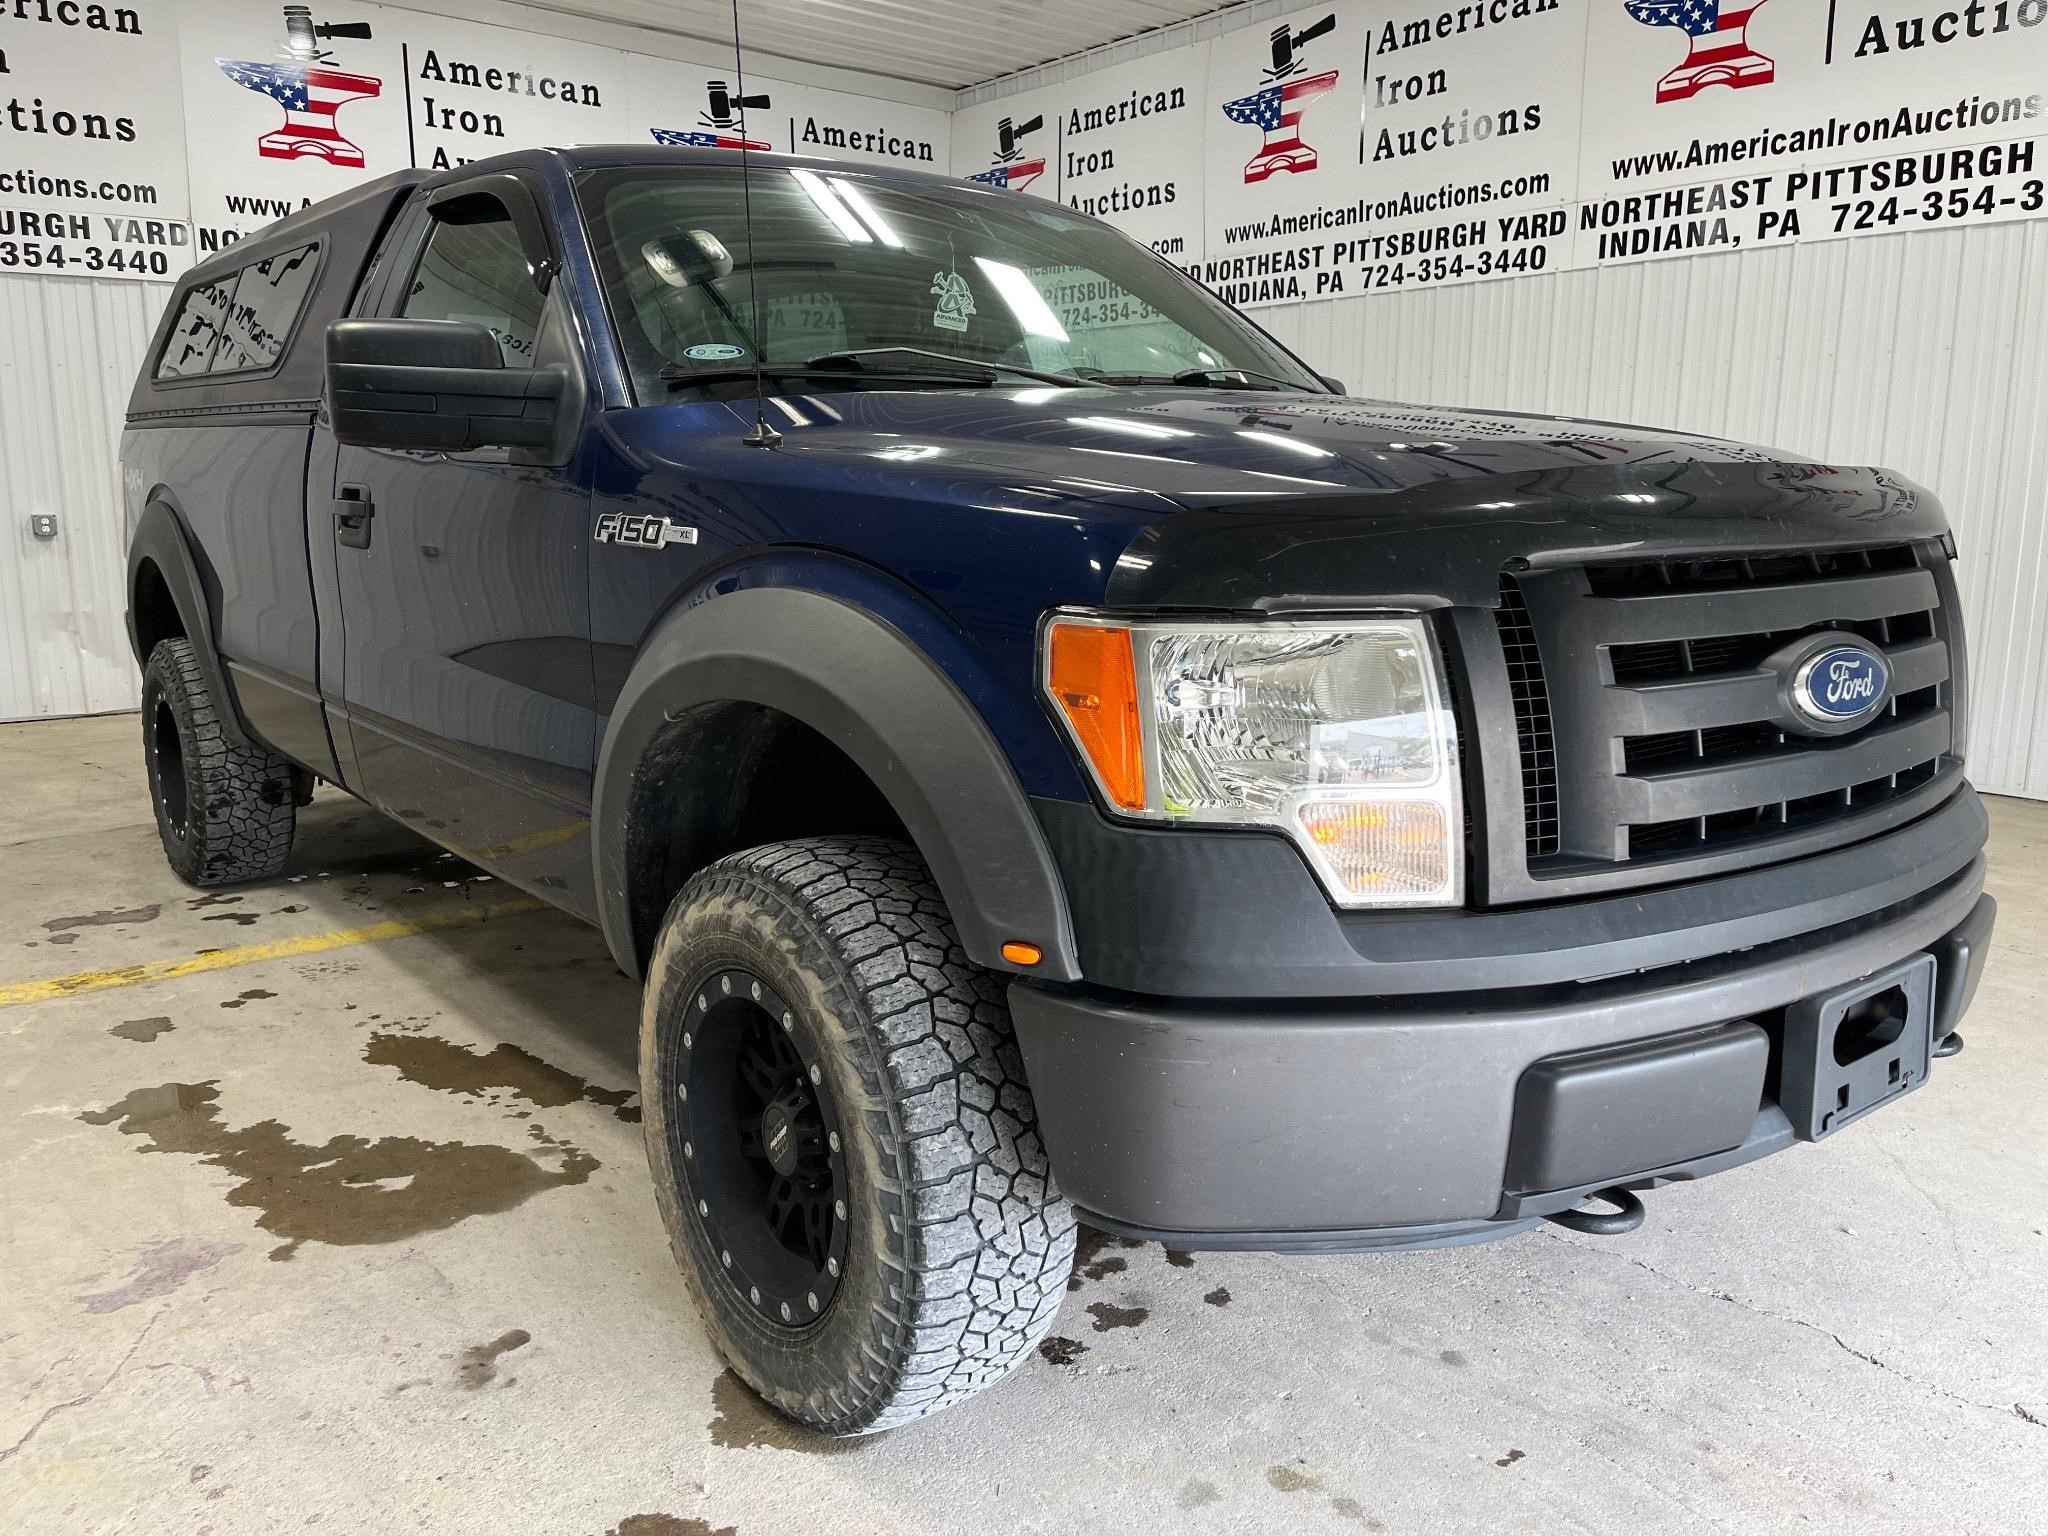 2011 Ford F 150 XL Truck - Titled NO RESERVE